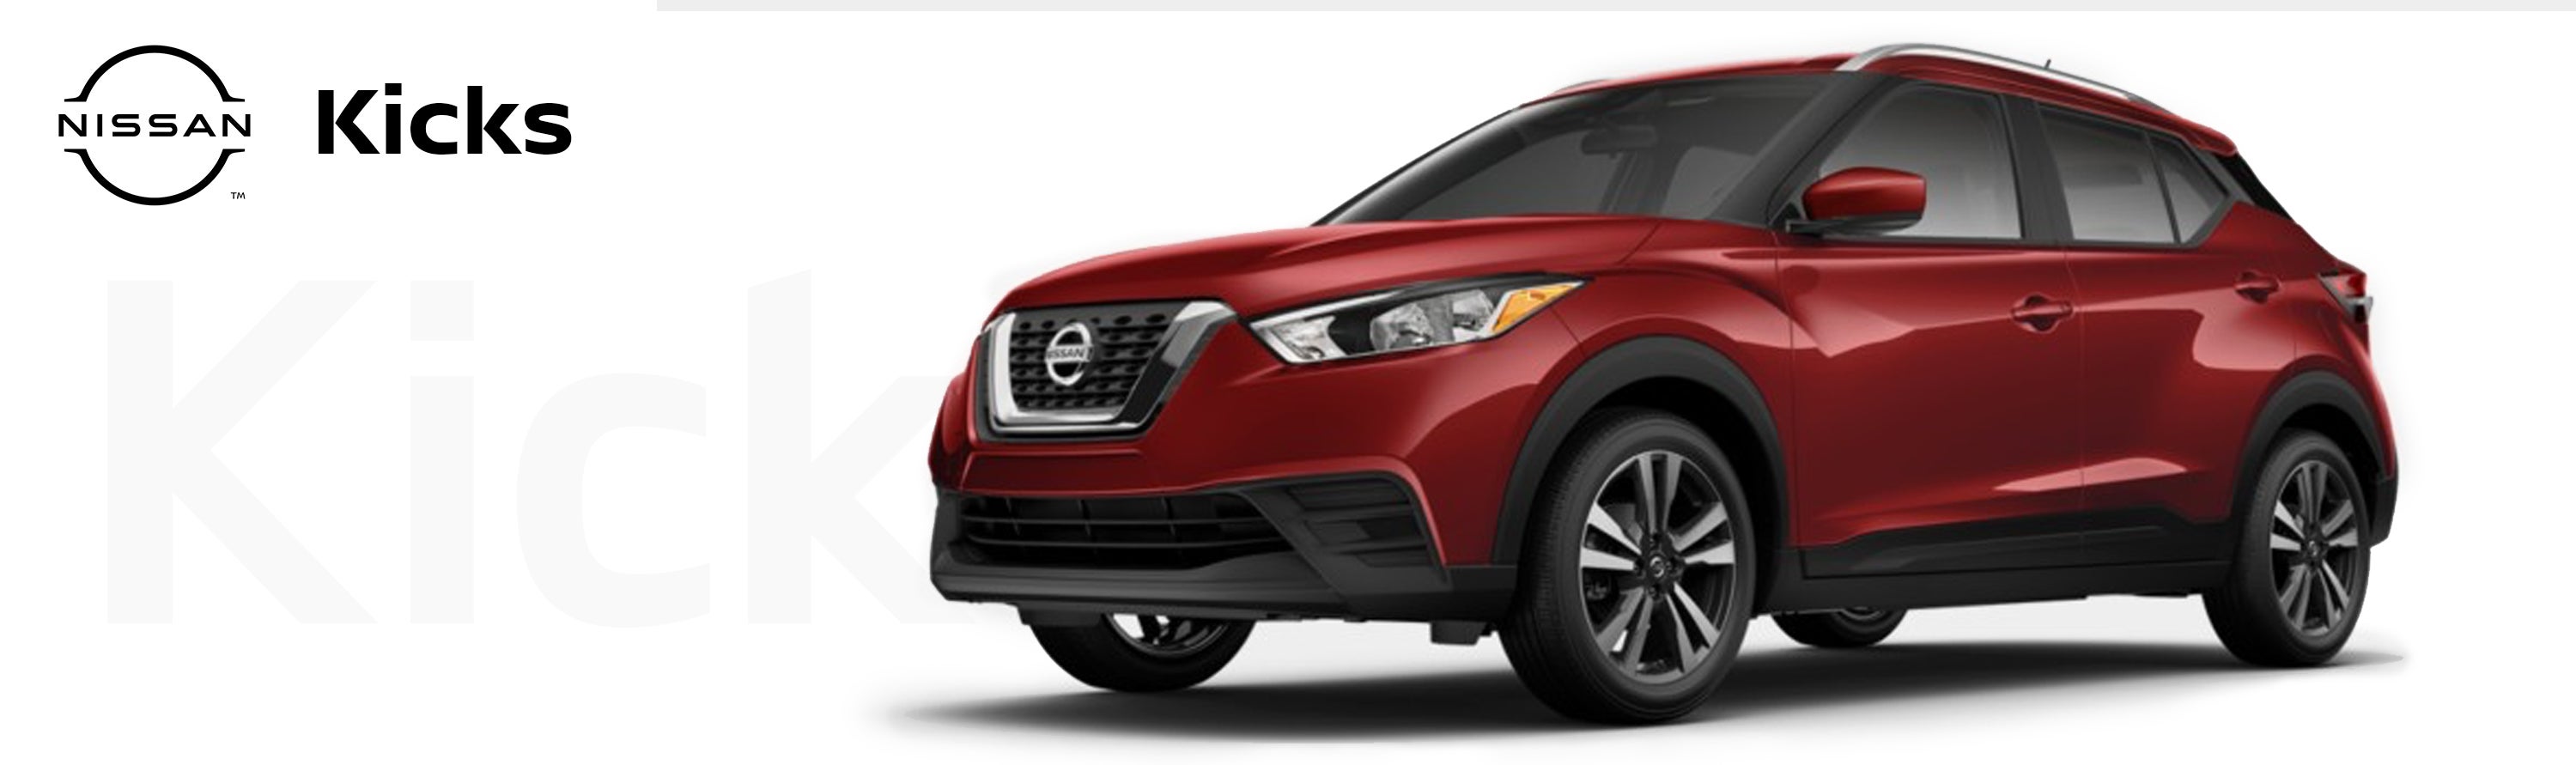 2020 Nissan Kicks at Clay Cooley Nissan of Irving in Irving TX